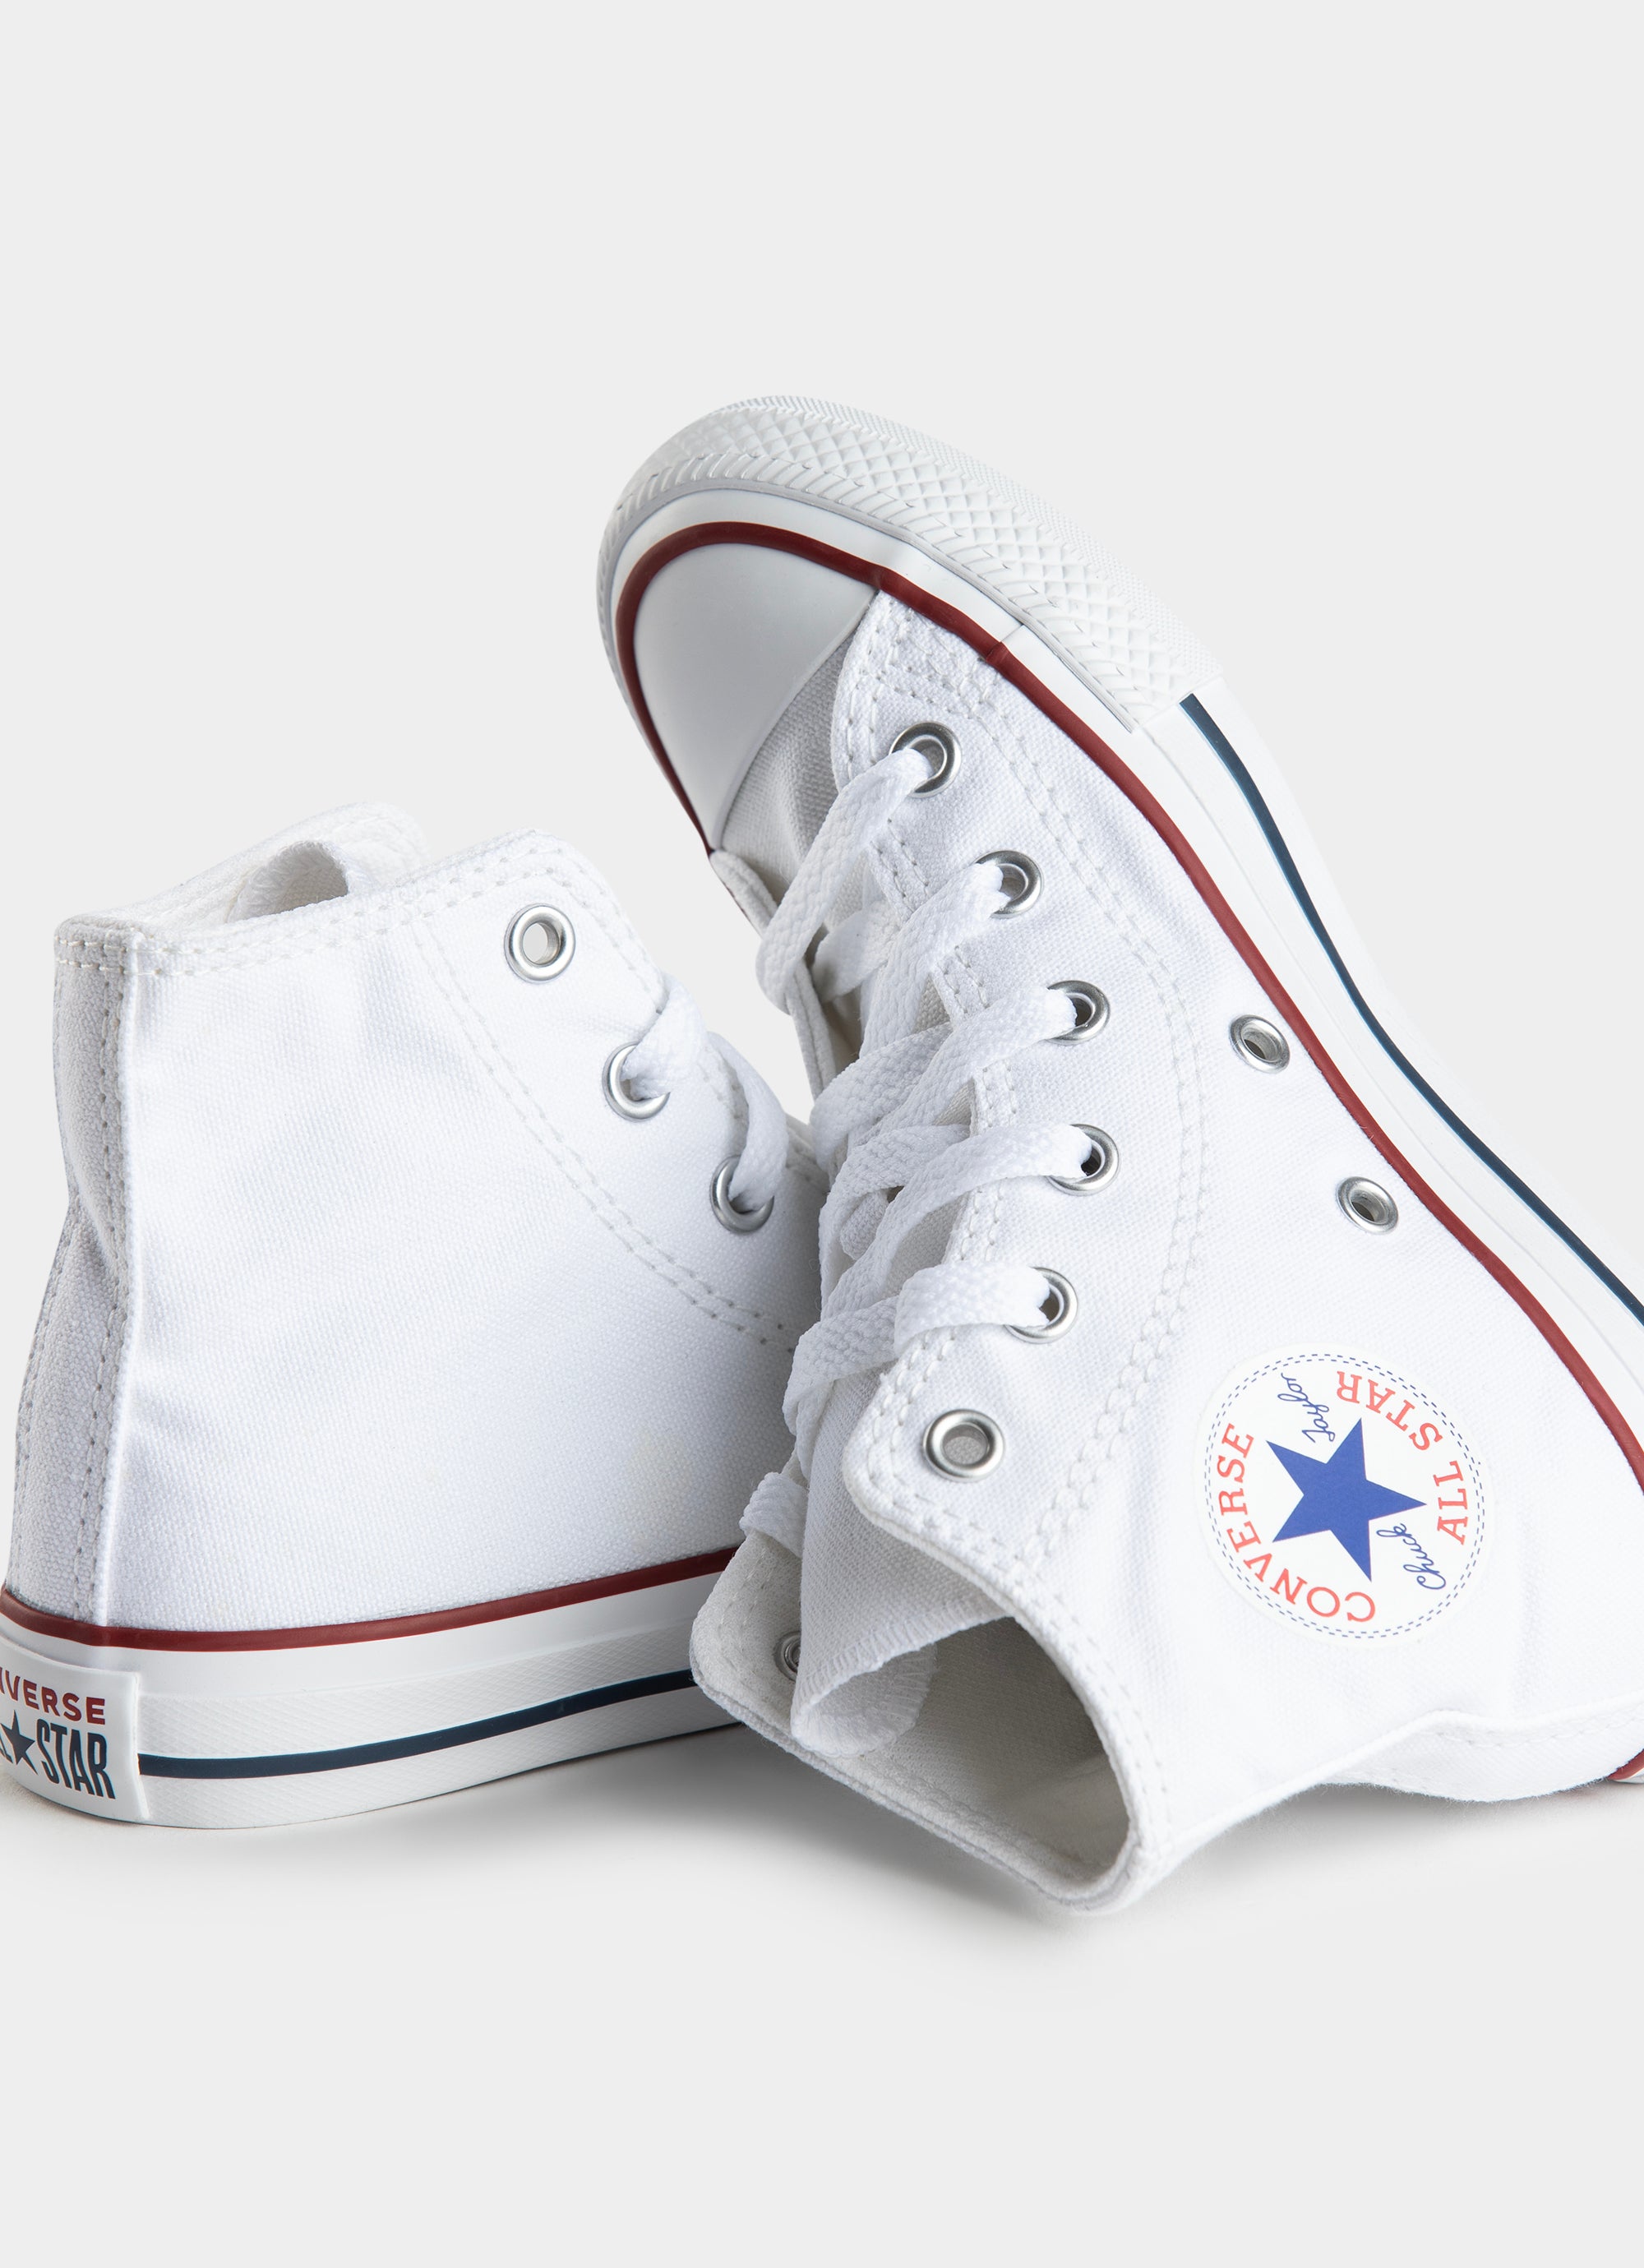 Converse Chuck Taylor All Star High Shoe - Kids in White | Red Rat